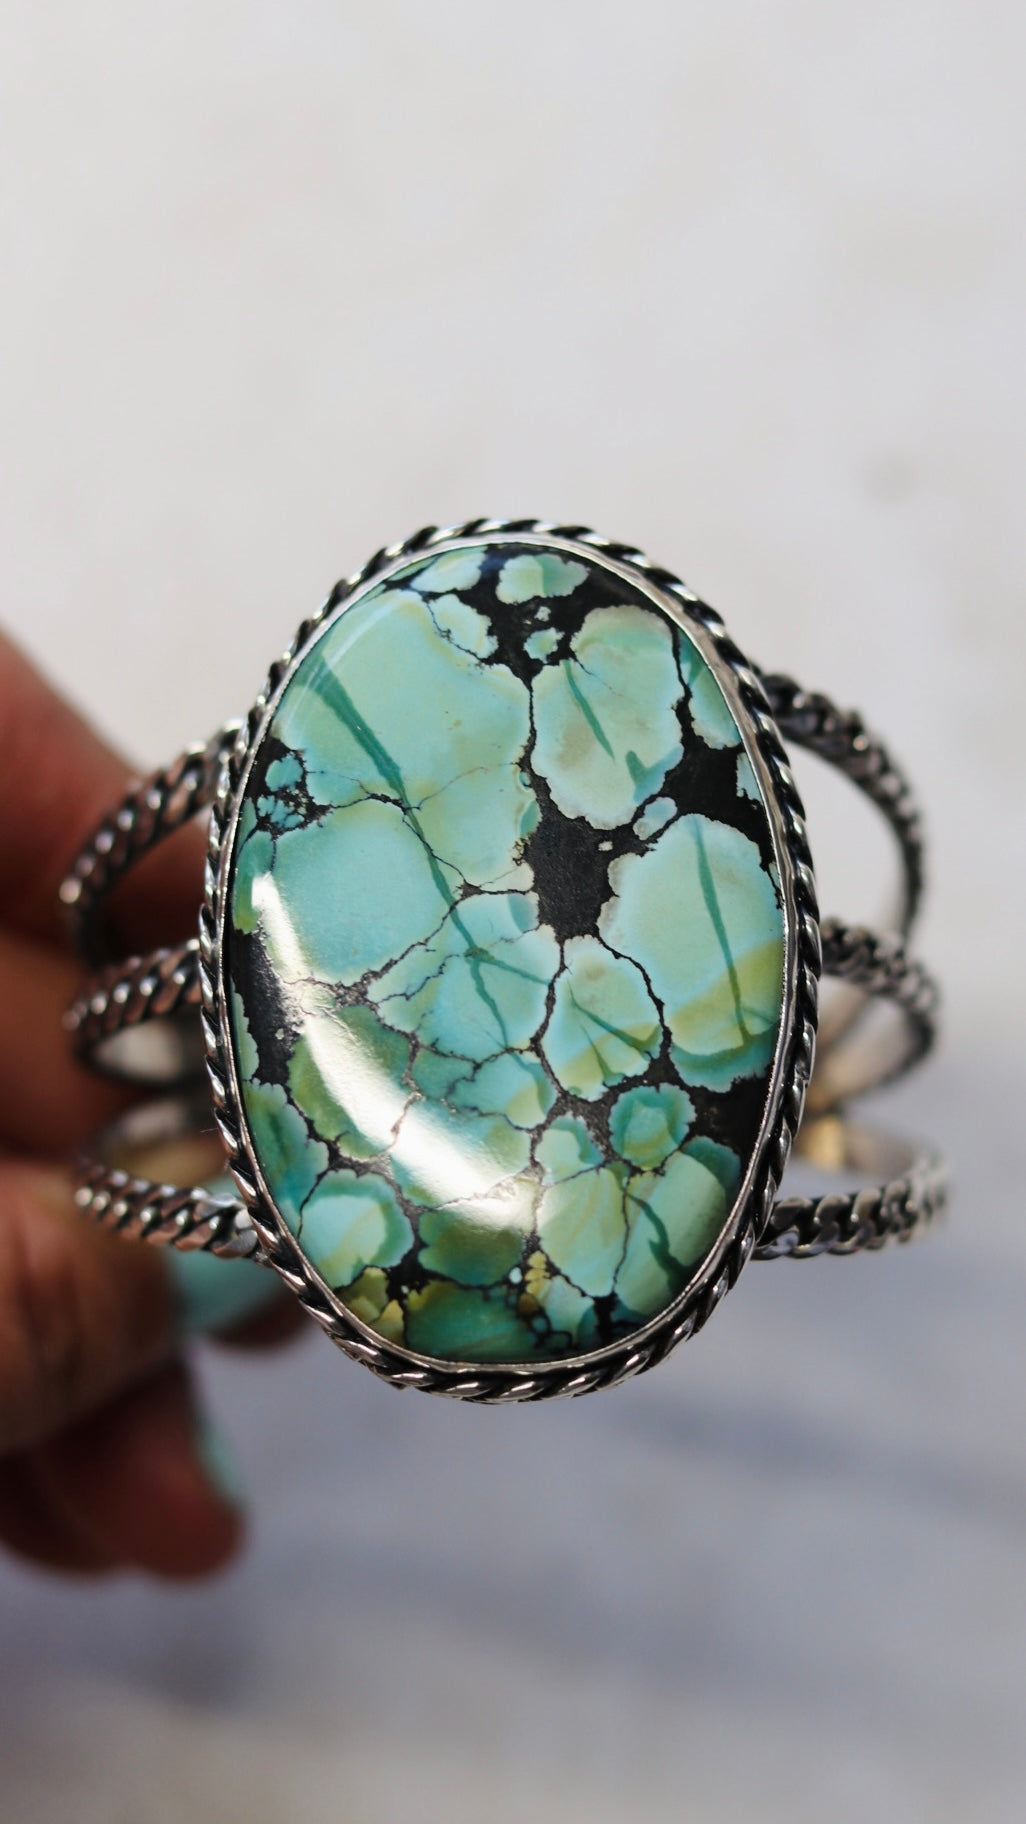 Giant turquoise Cuff